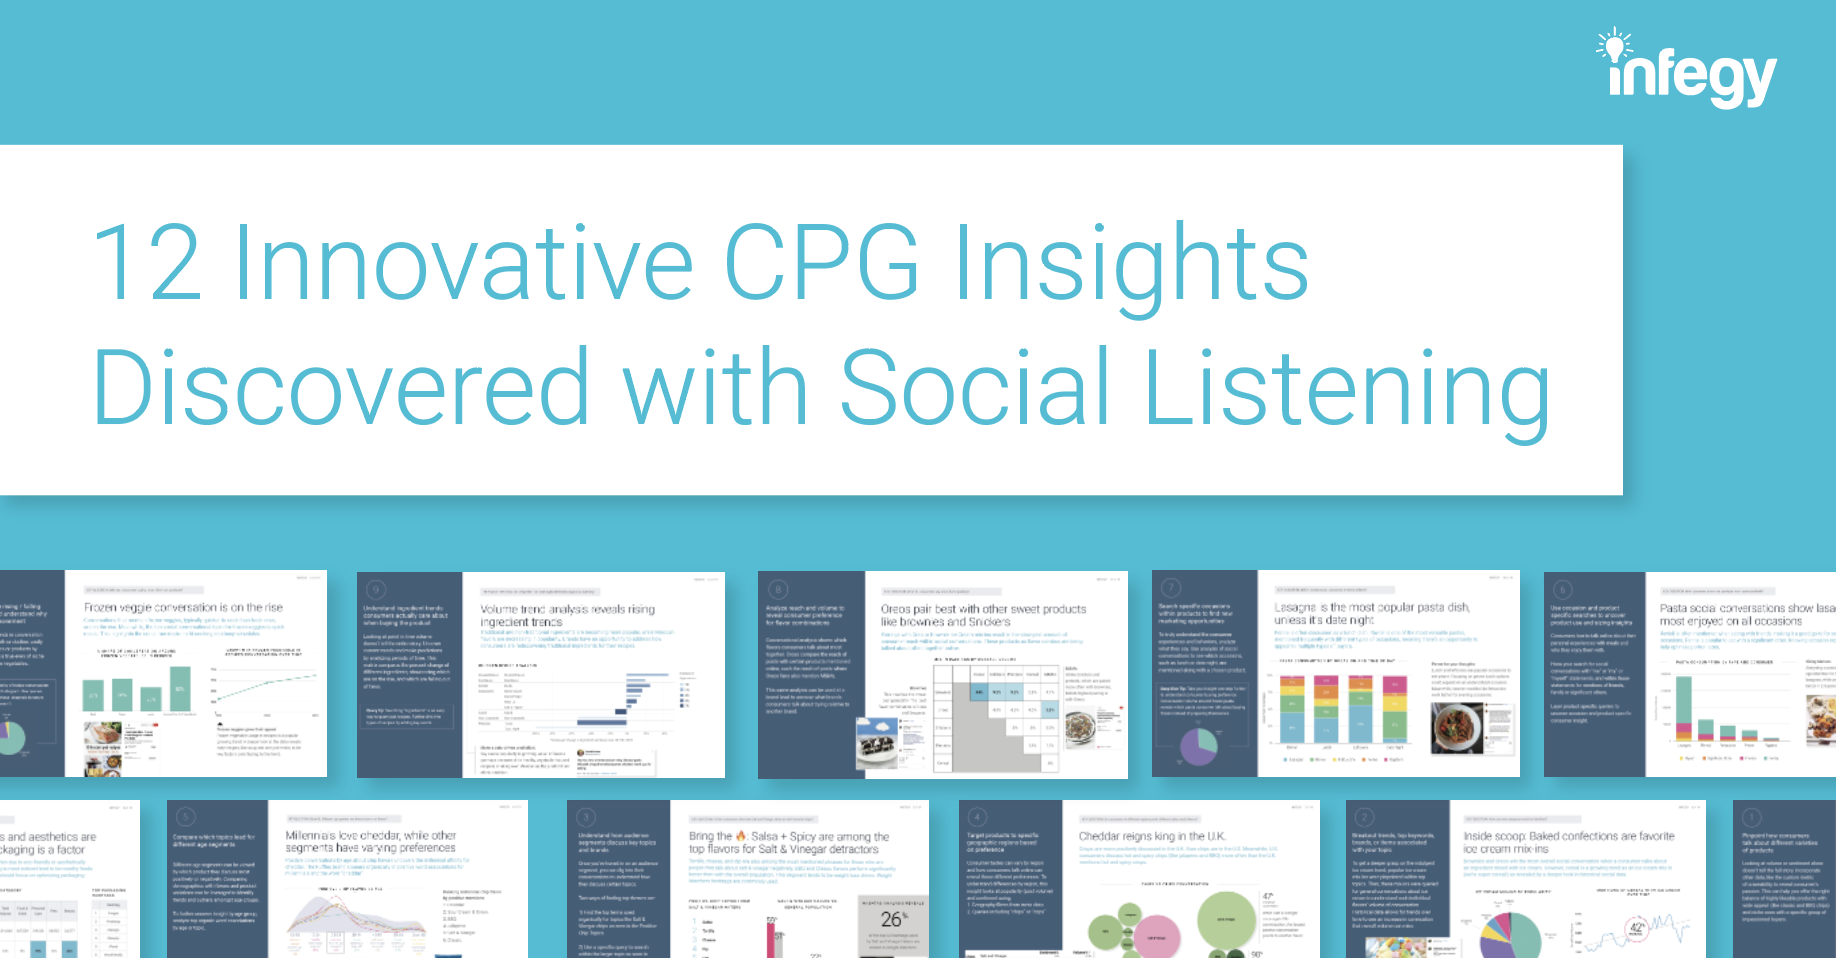 How to find CPG insights with social listening